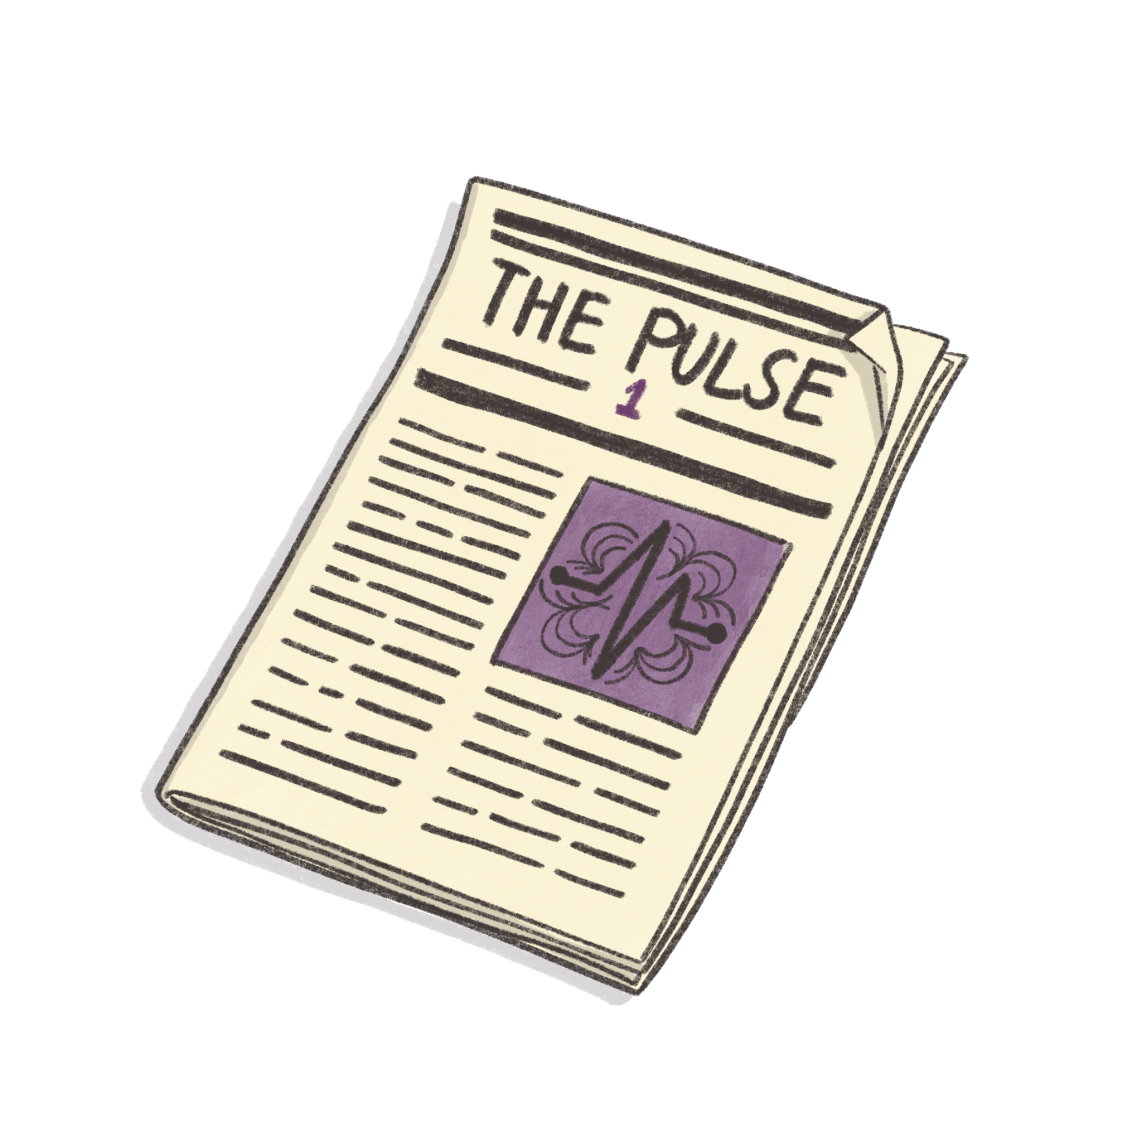 The Apoio Pulse – Issue One image